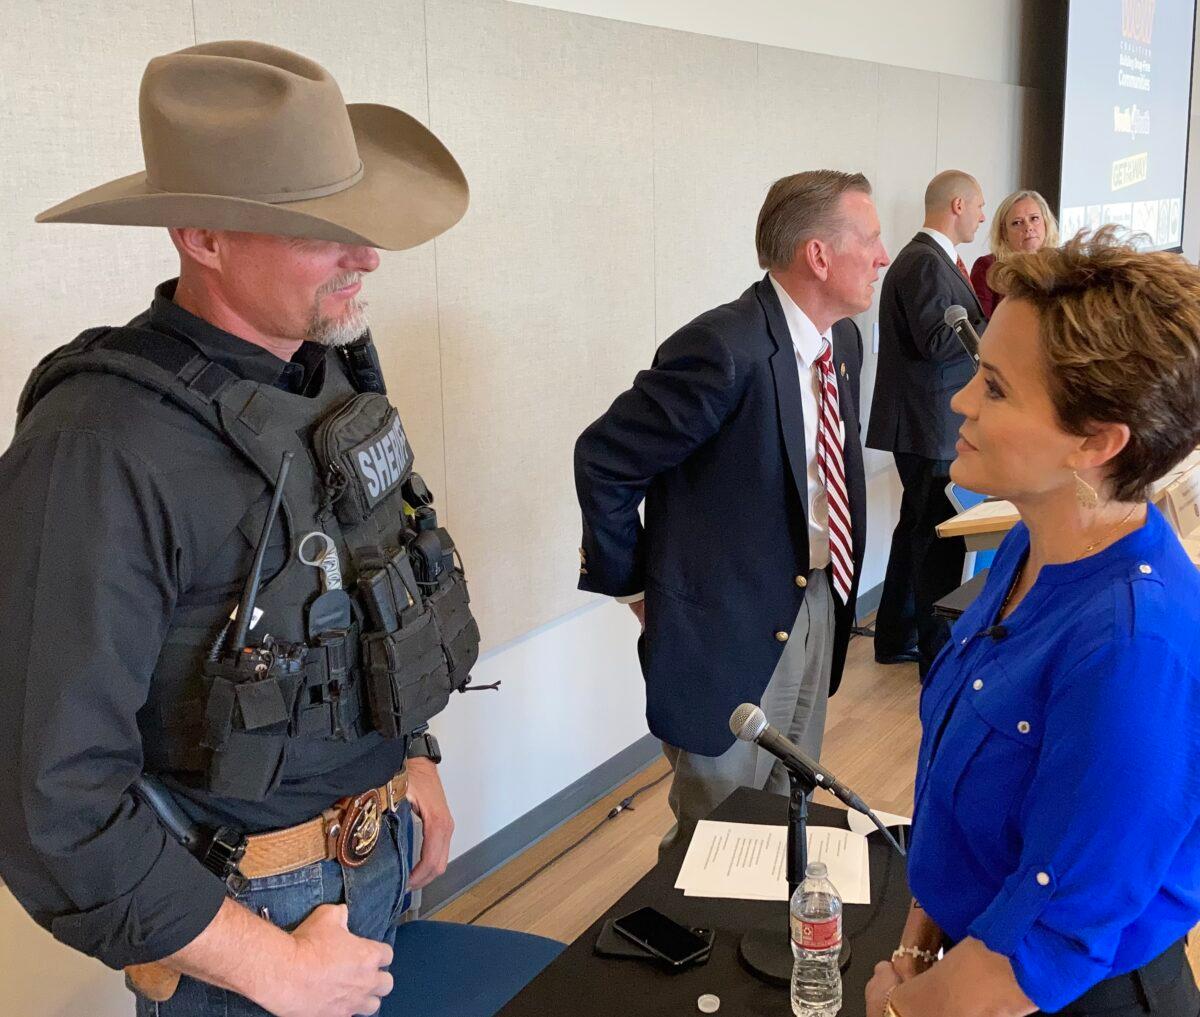 Pinal County Sheriff Mark Lamb speaks with Kari Lake, the Republican candidate for Arizona governor, during a roundtable discussion of the fentanyl crisis in Goodyear, Ariz., on March 14, 2022. (Allan Stein/The Epoch Times)